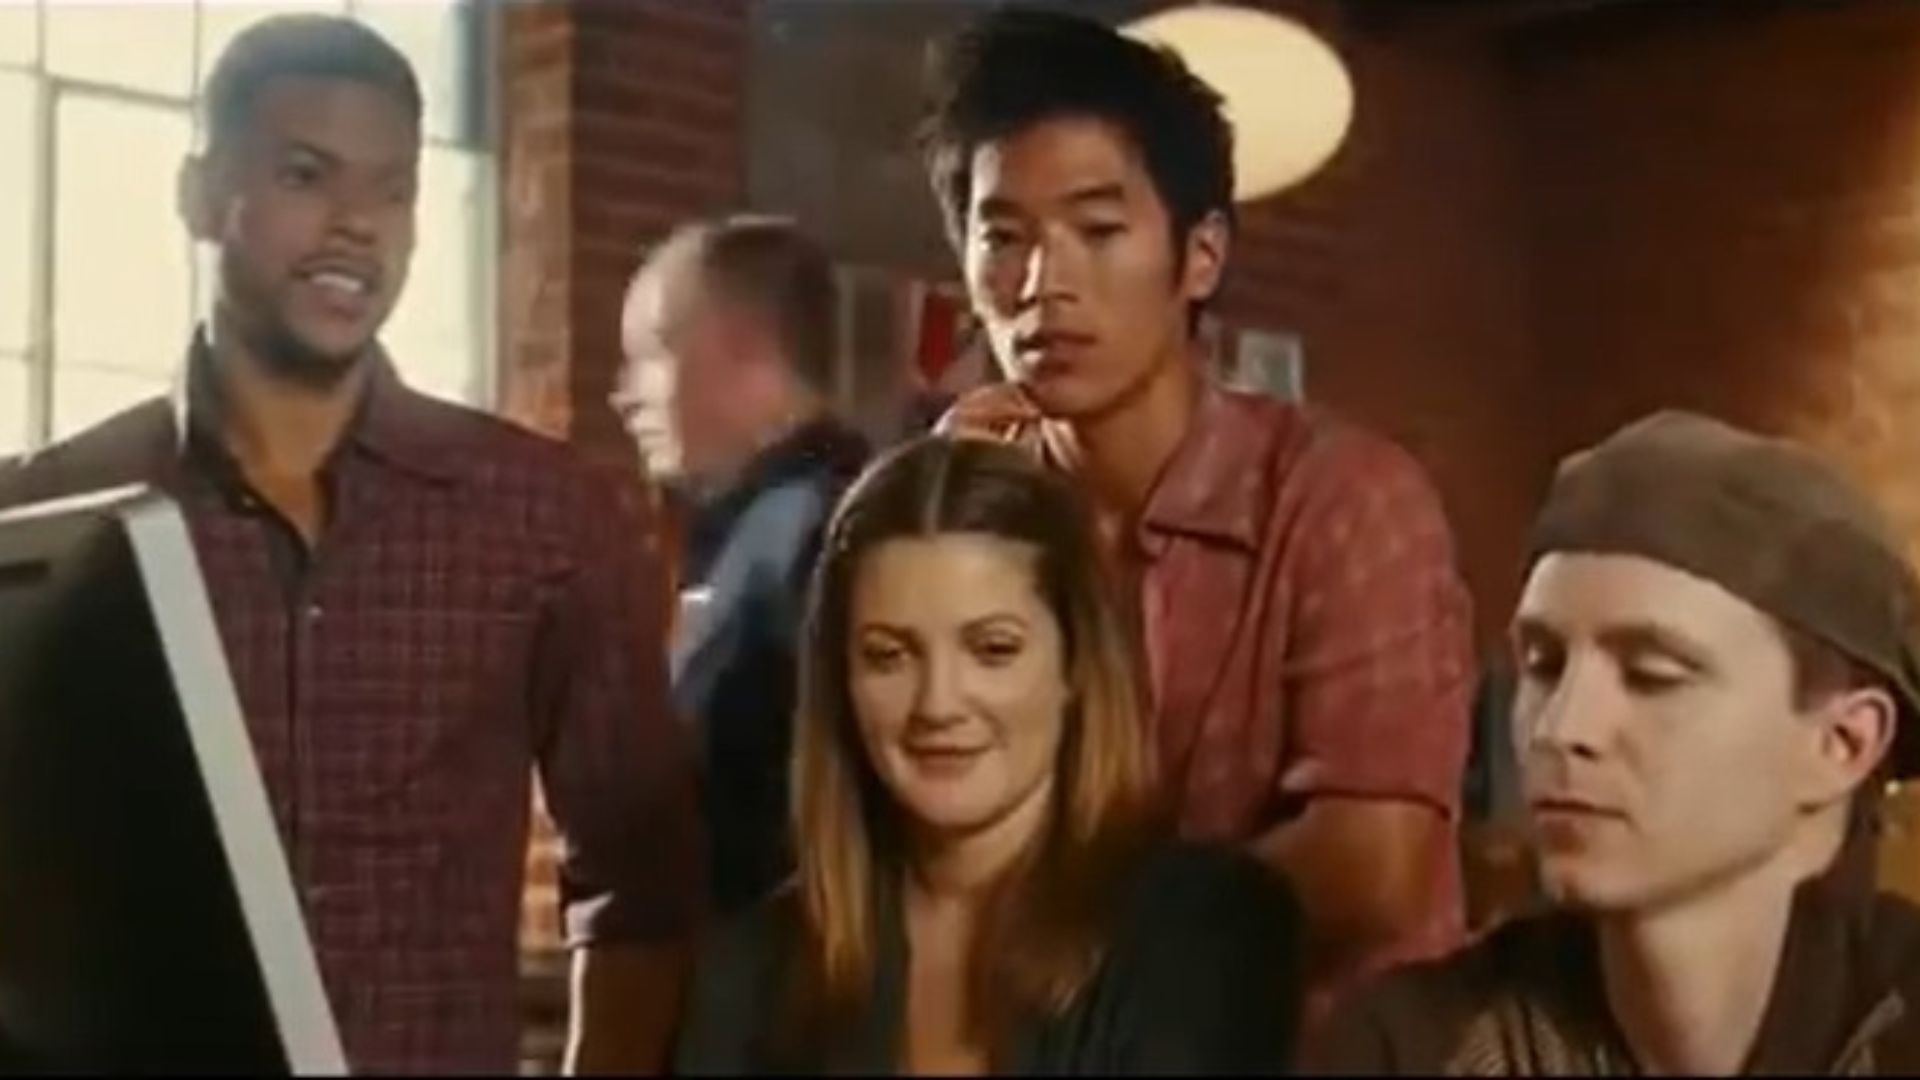 Drew Barrymore and cast of coworkers in He's Just Not That Into You.